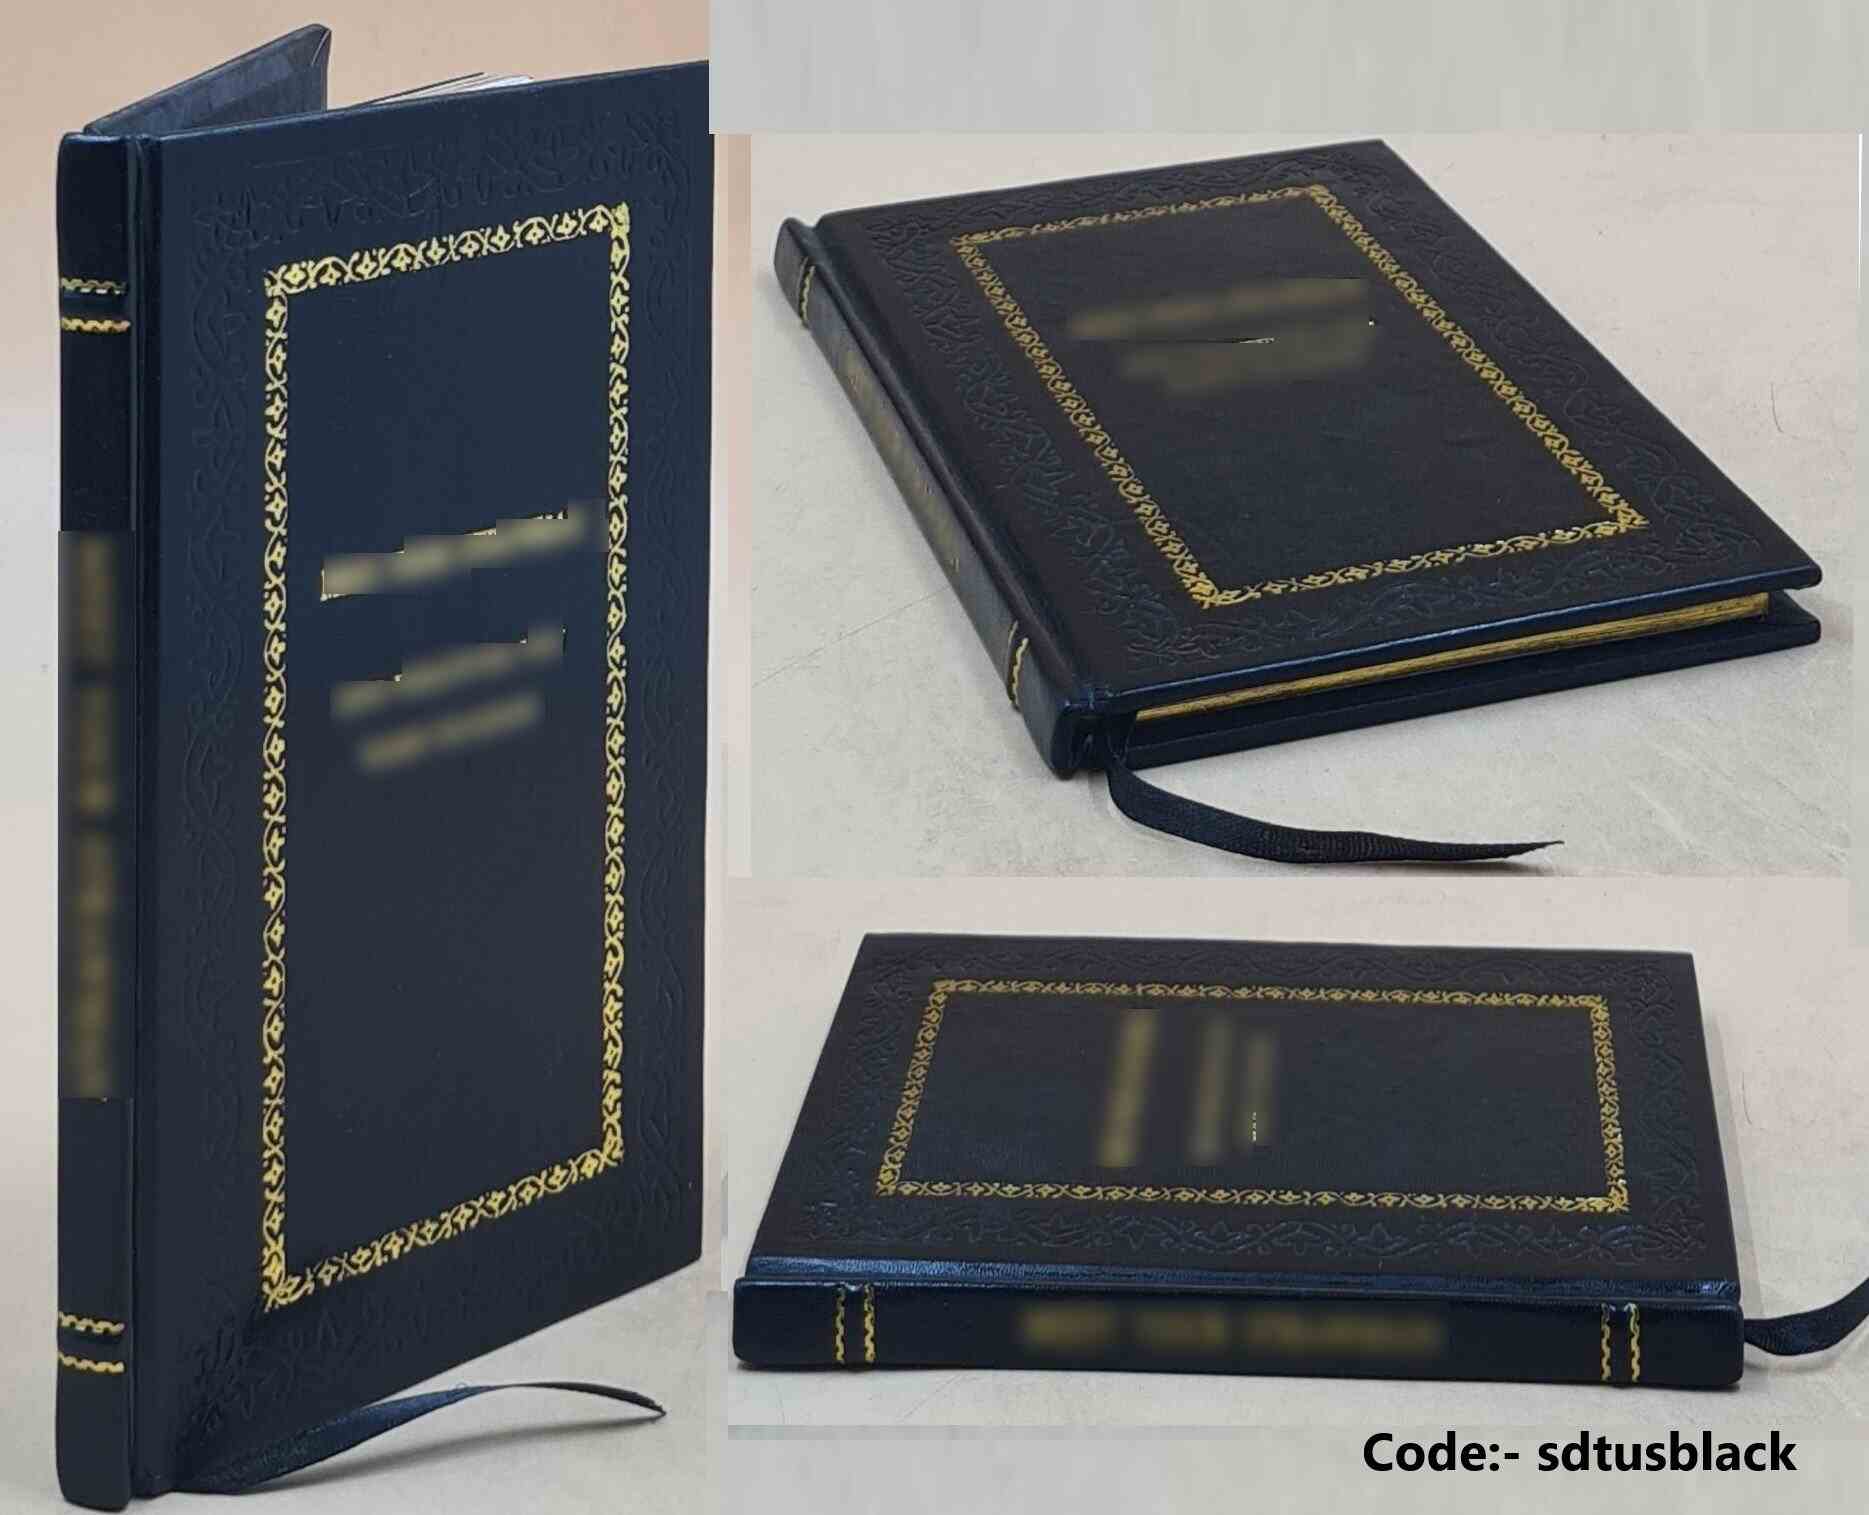 Cuthbert Grant Jr., A Metis Visionary [Premium Leather Bound] by